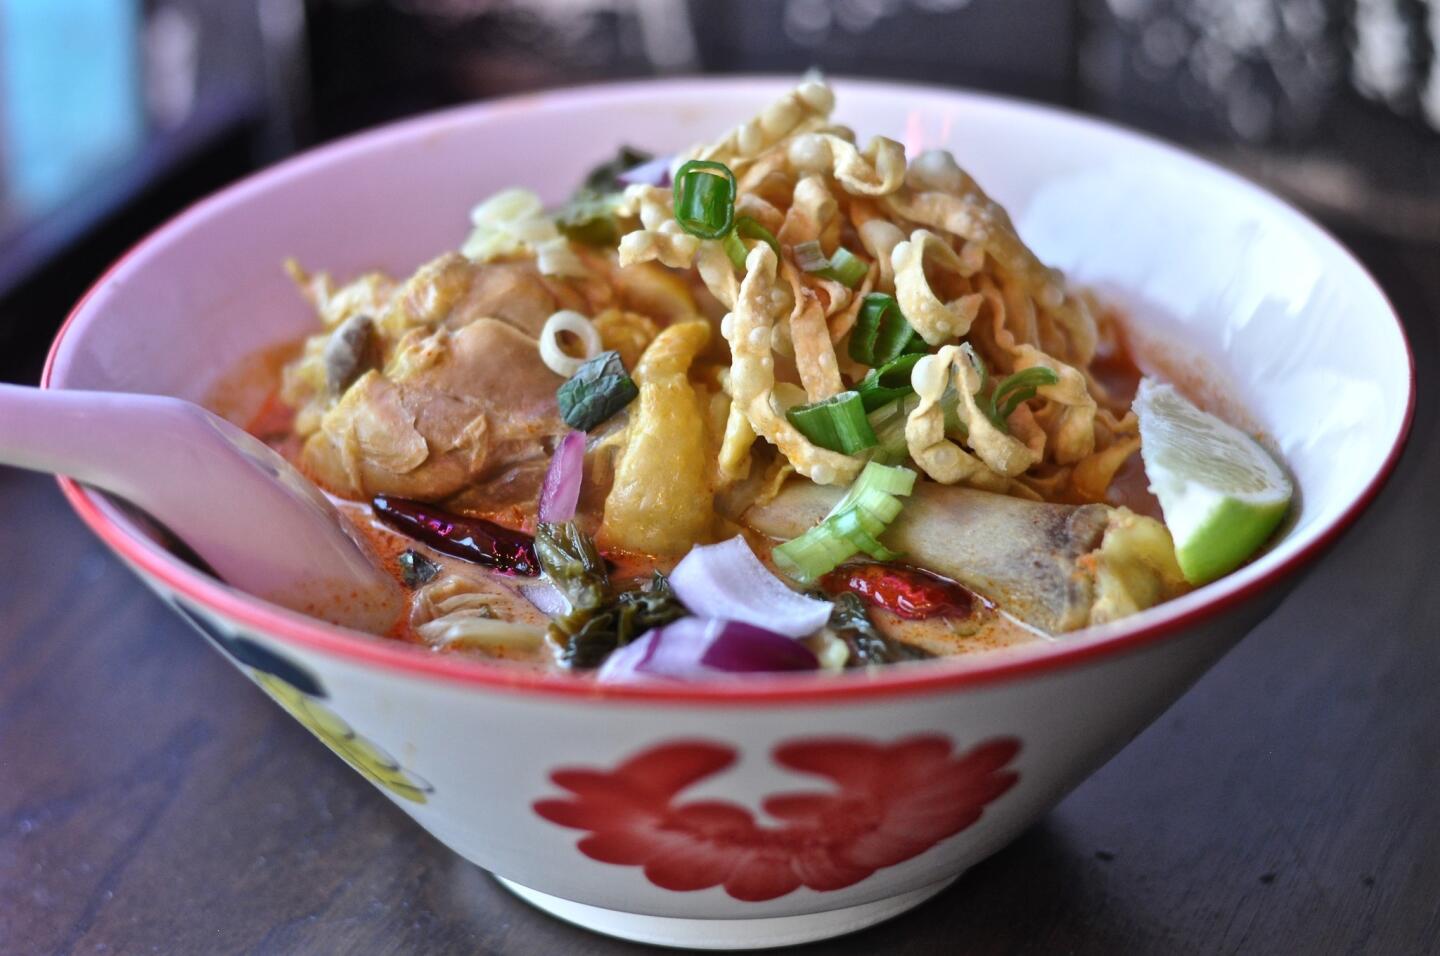 A bowl of khao soi, this one with a chicken leg, at the new northern Thai restaurant on Hollywood Boulevard.